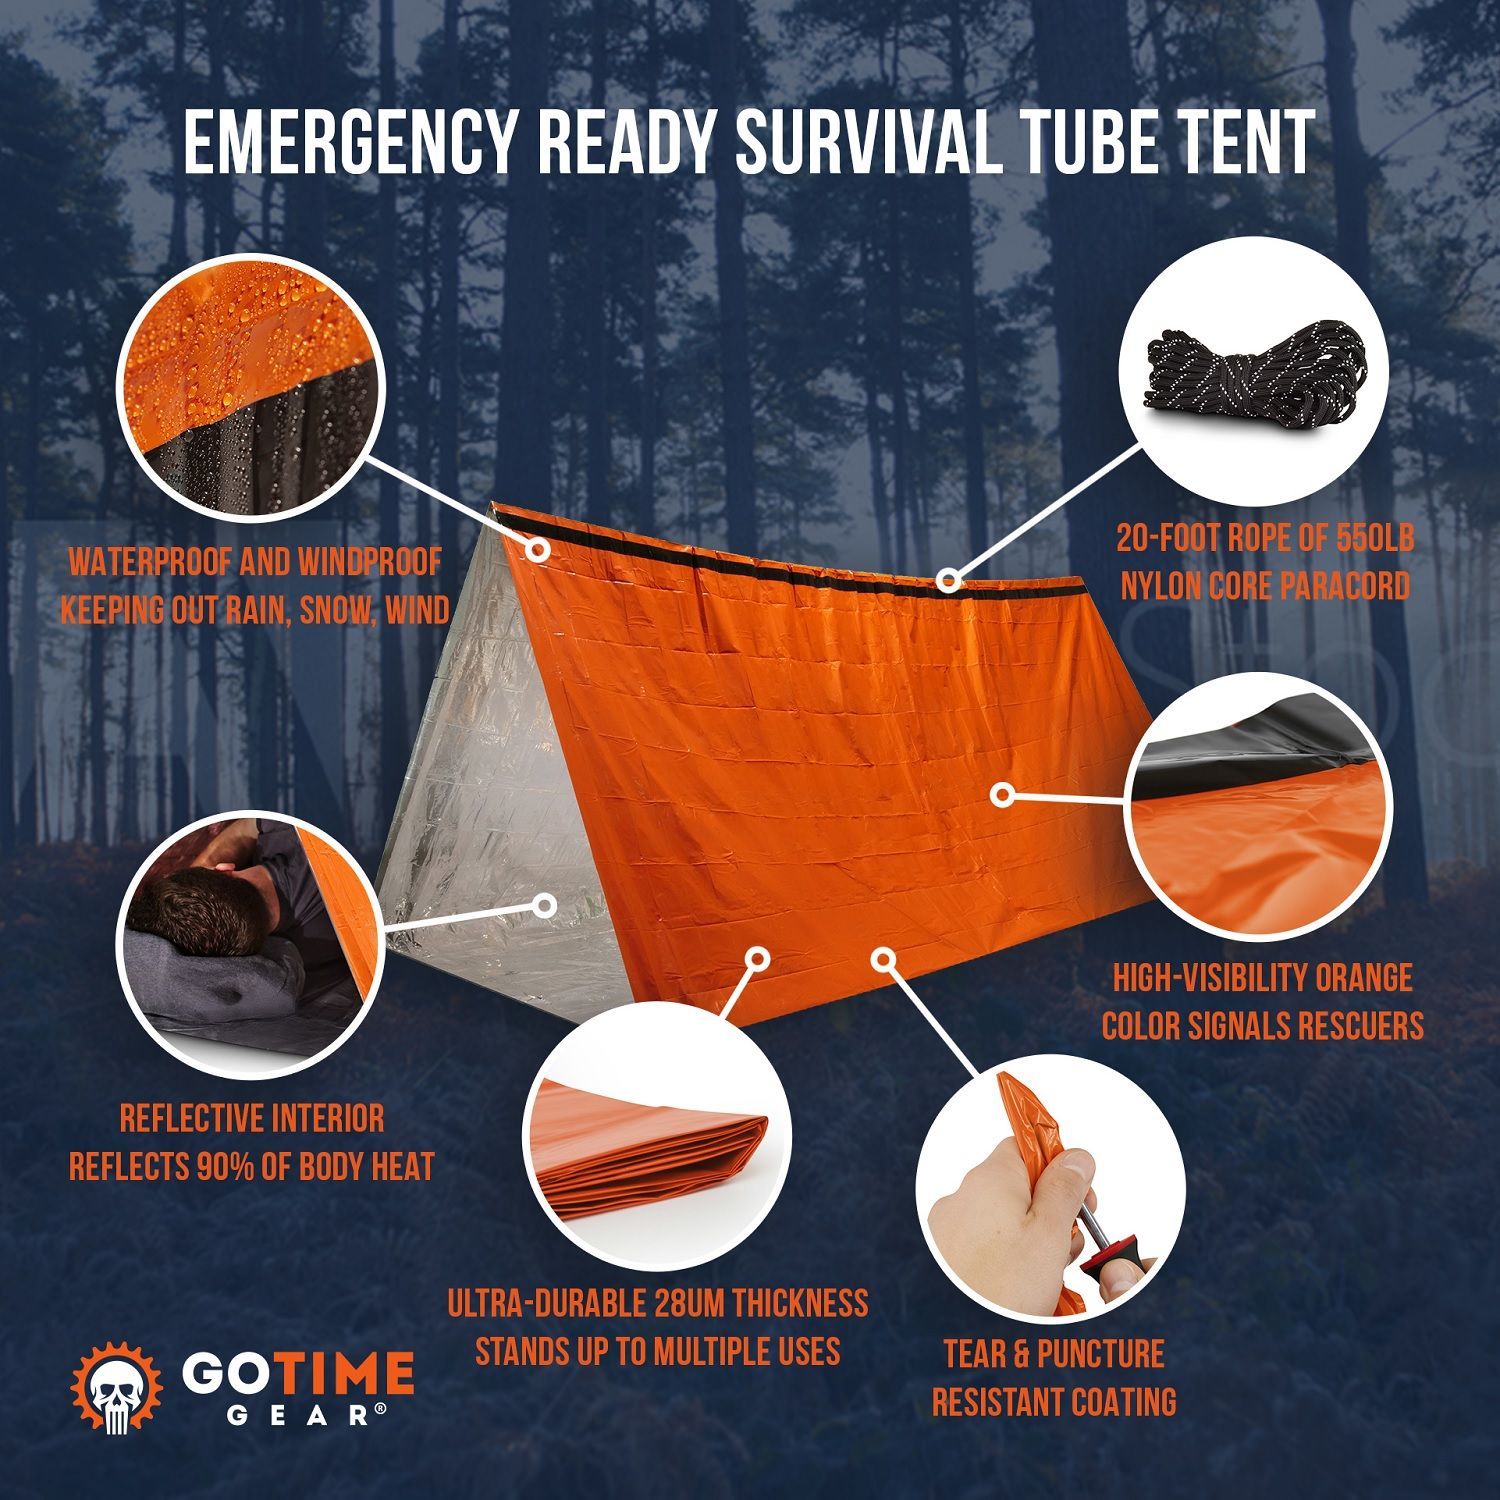 Go Time Gear Life Tent Emergency Survival Shelter - 2 Person Emergency Tent - Use As Survival Tent, Emergency Shelter, Tube Tent